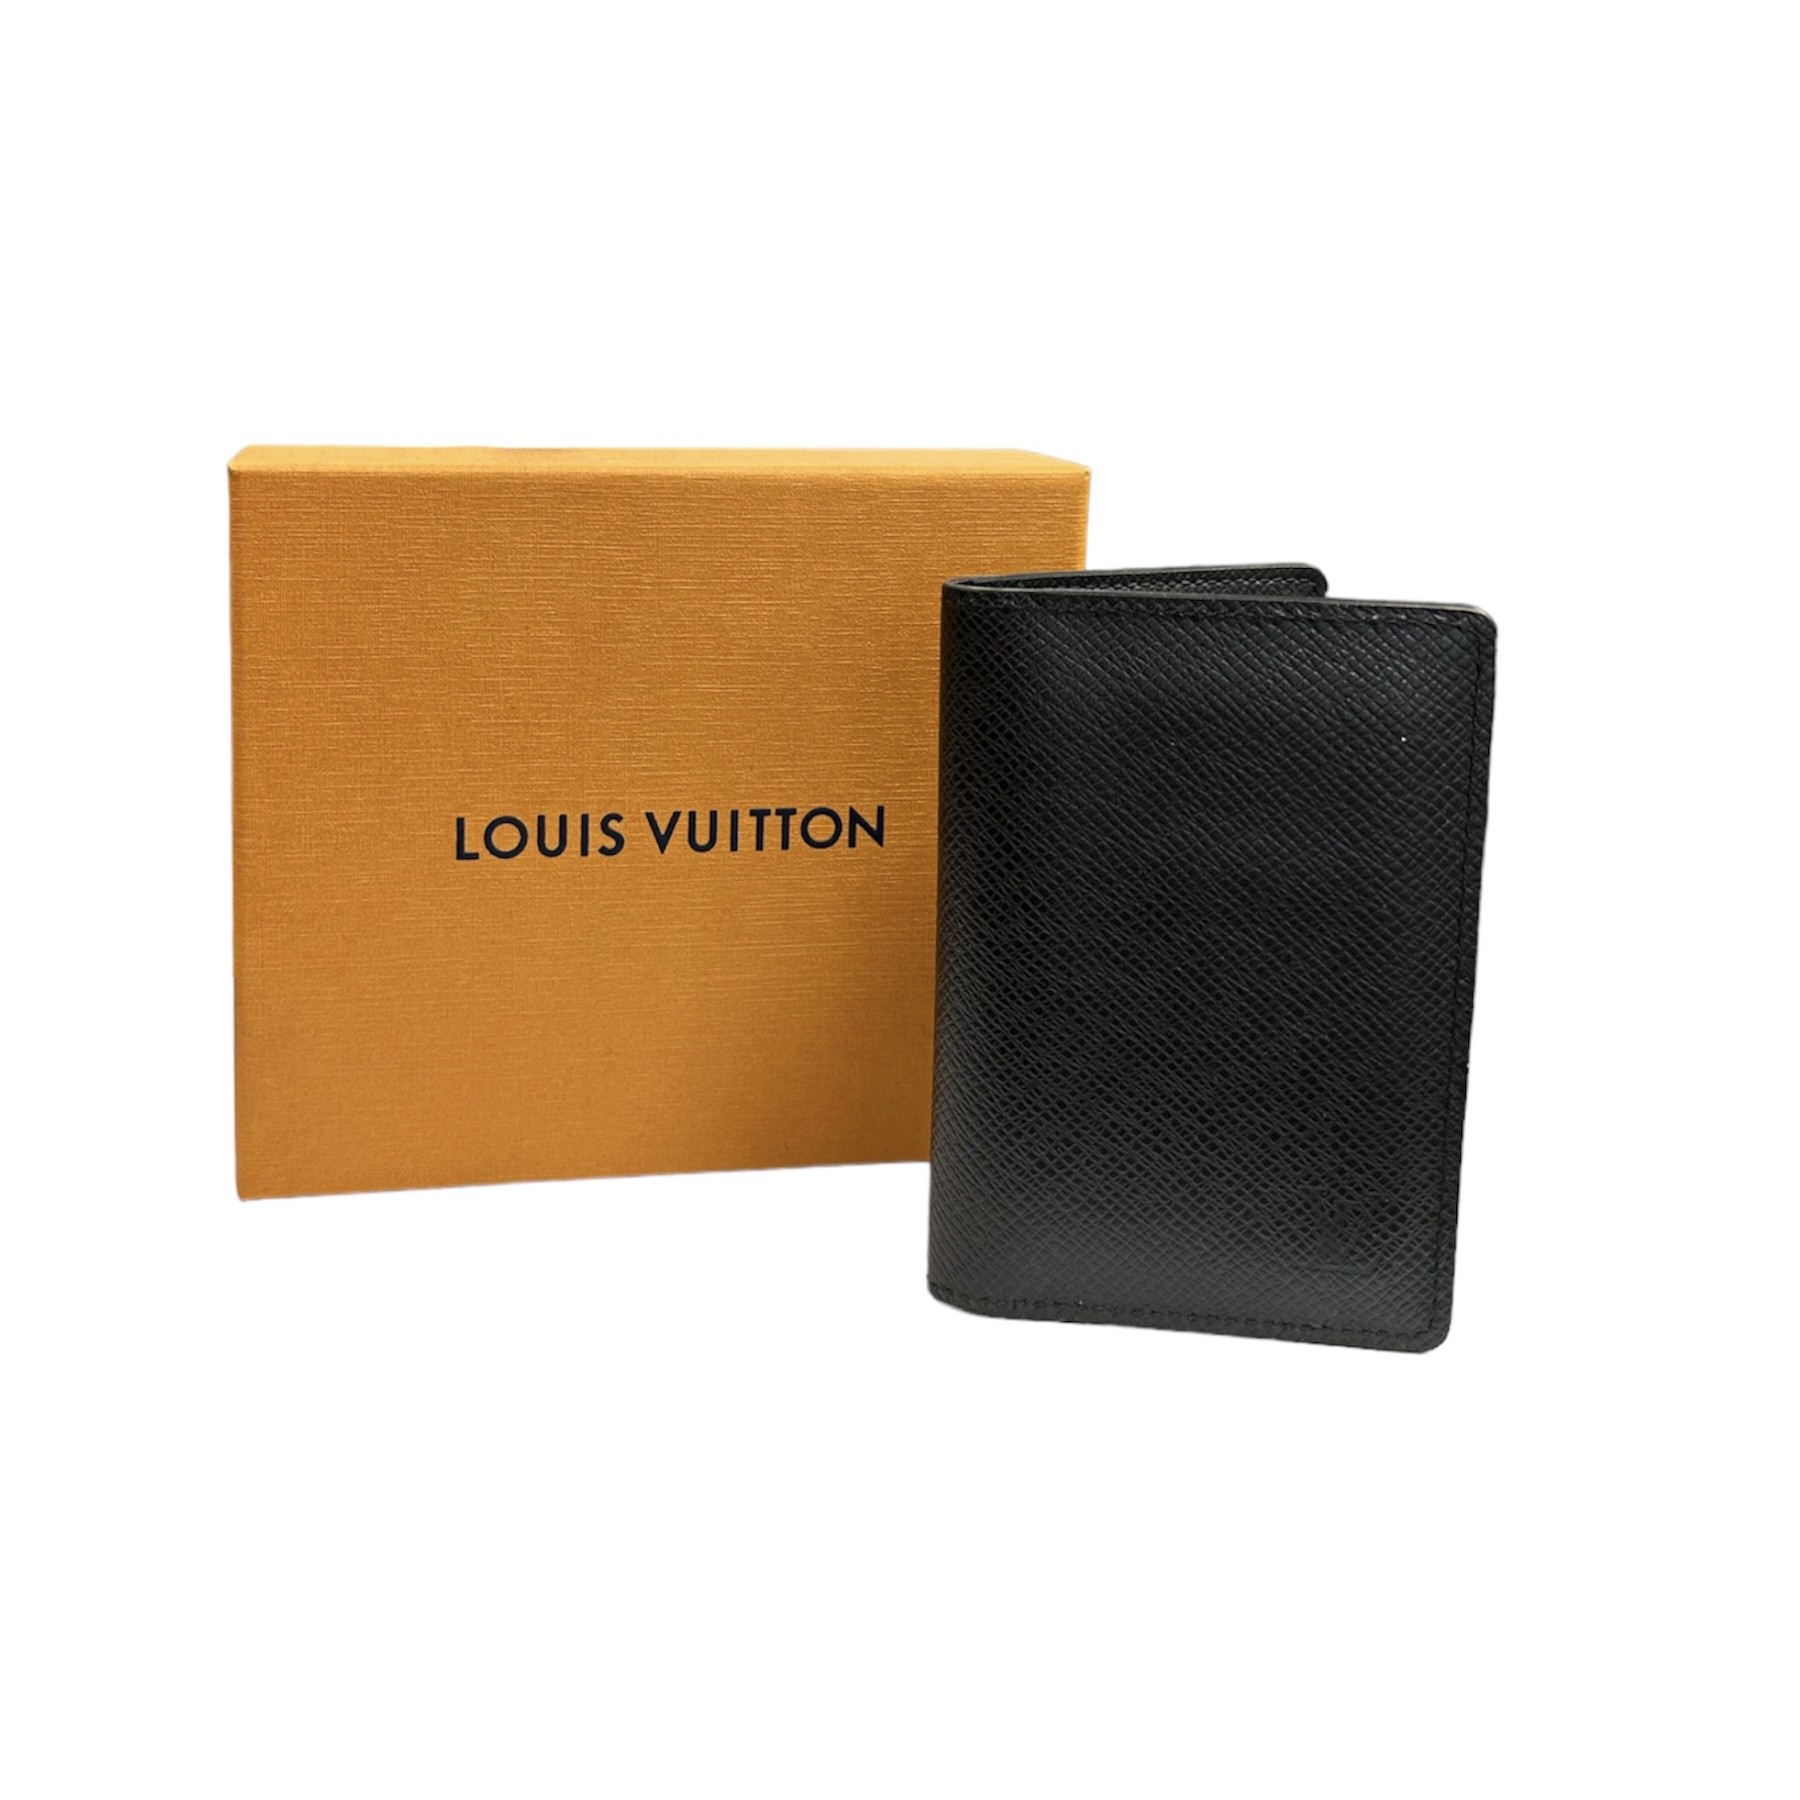 Authentic Vintage Louis Vuitton Organizer Trifold Wallet Made In France